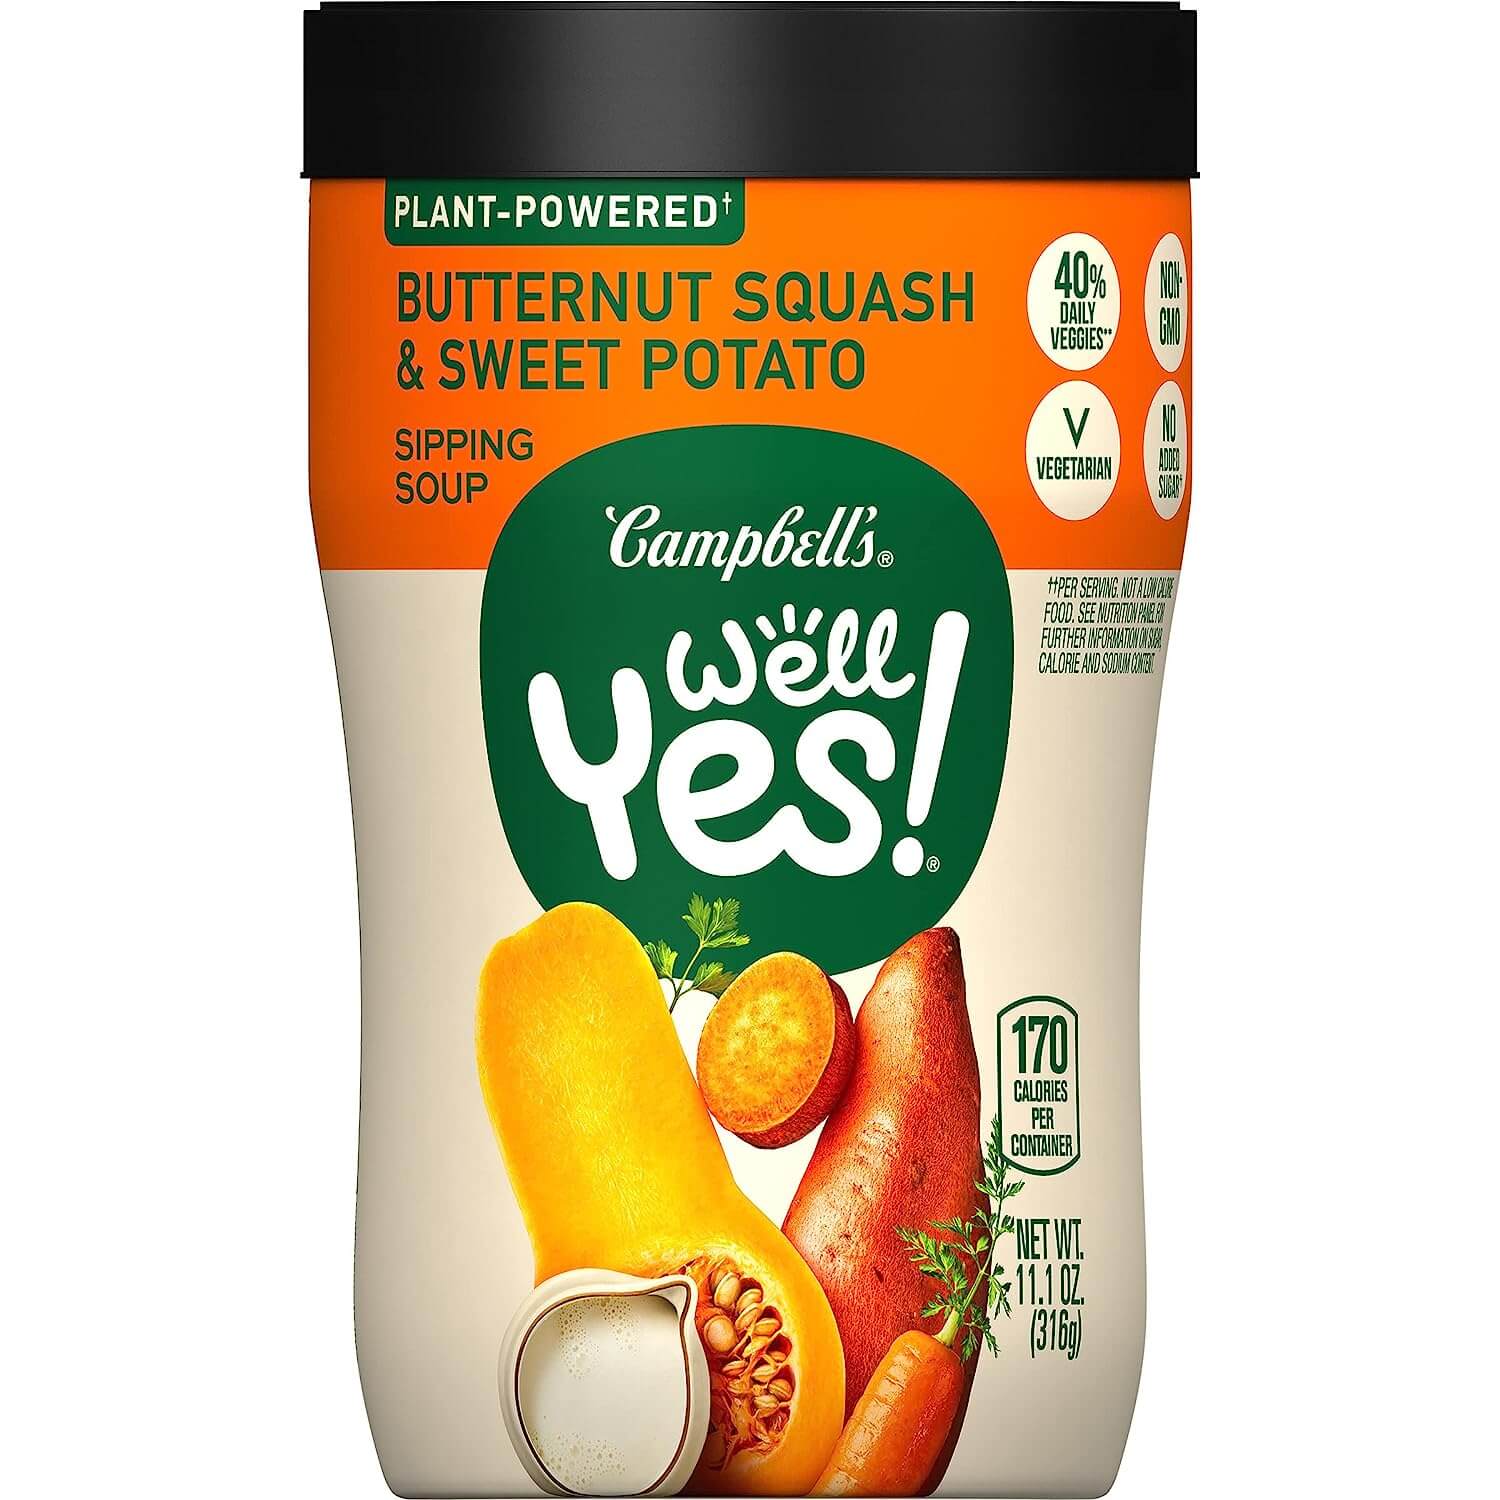 Campbell's Well Yes! Butternut Squash and Sweet Potato Soup